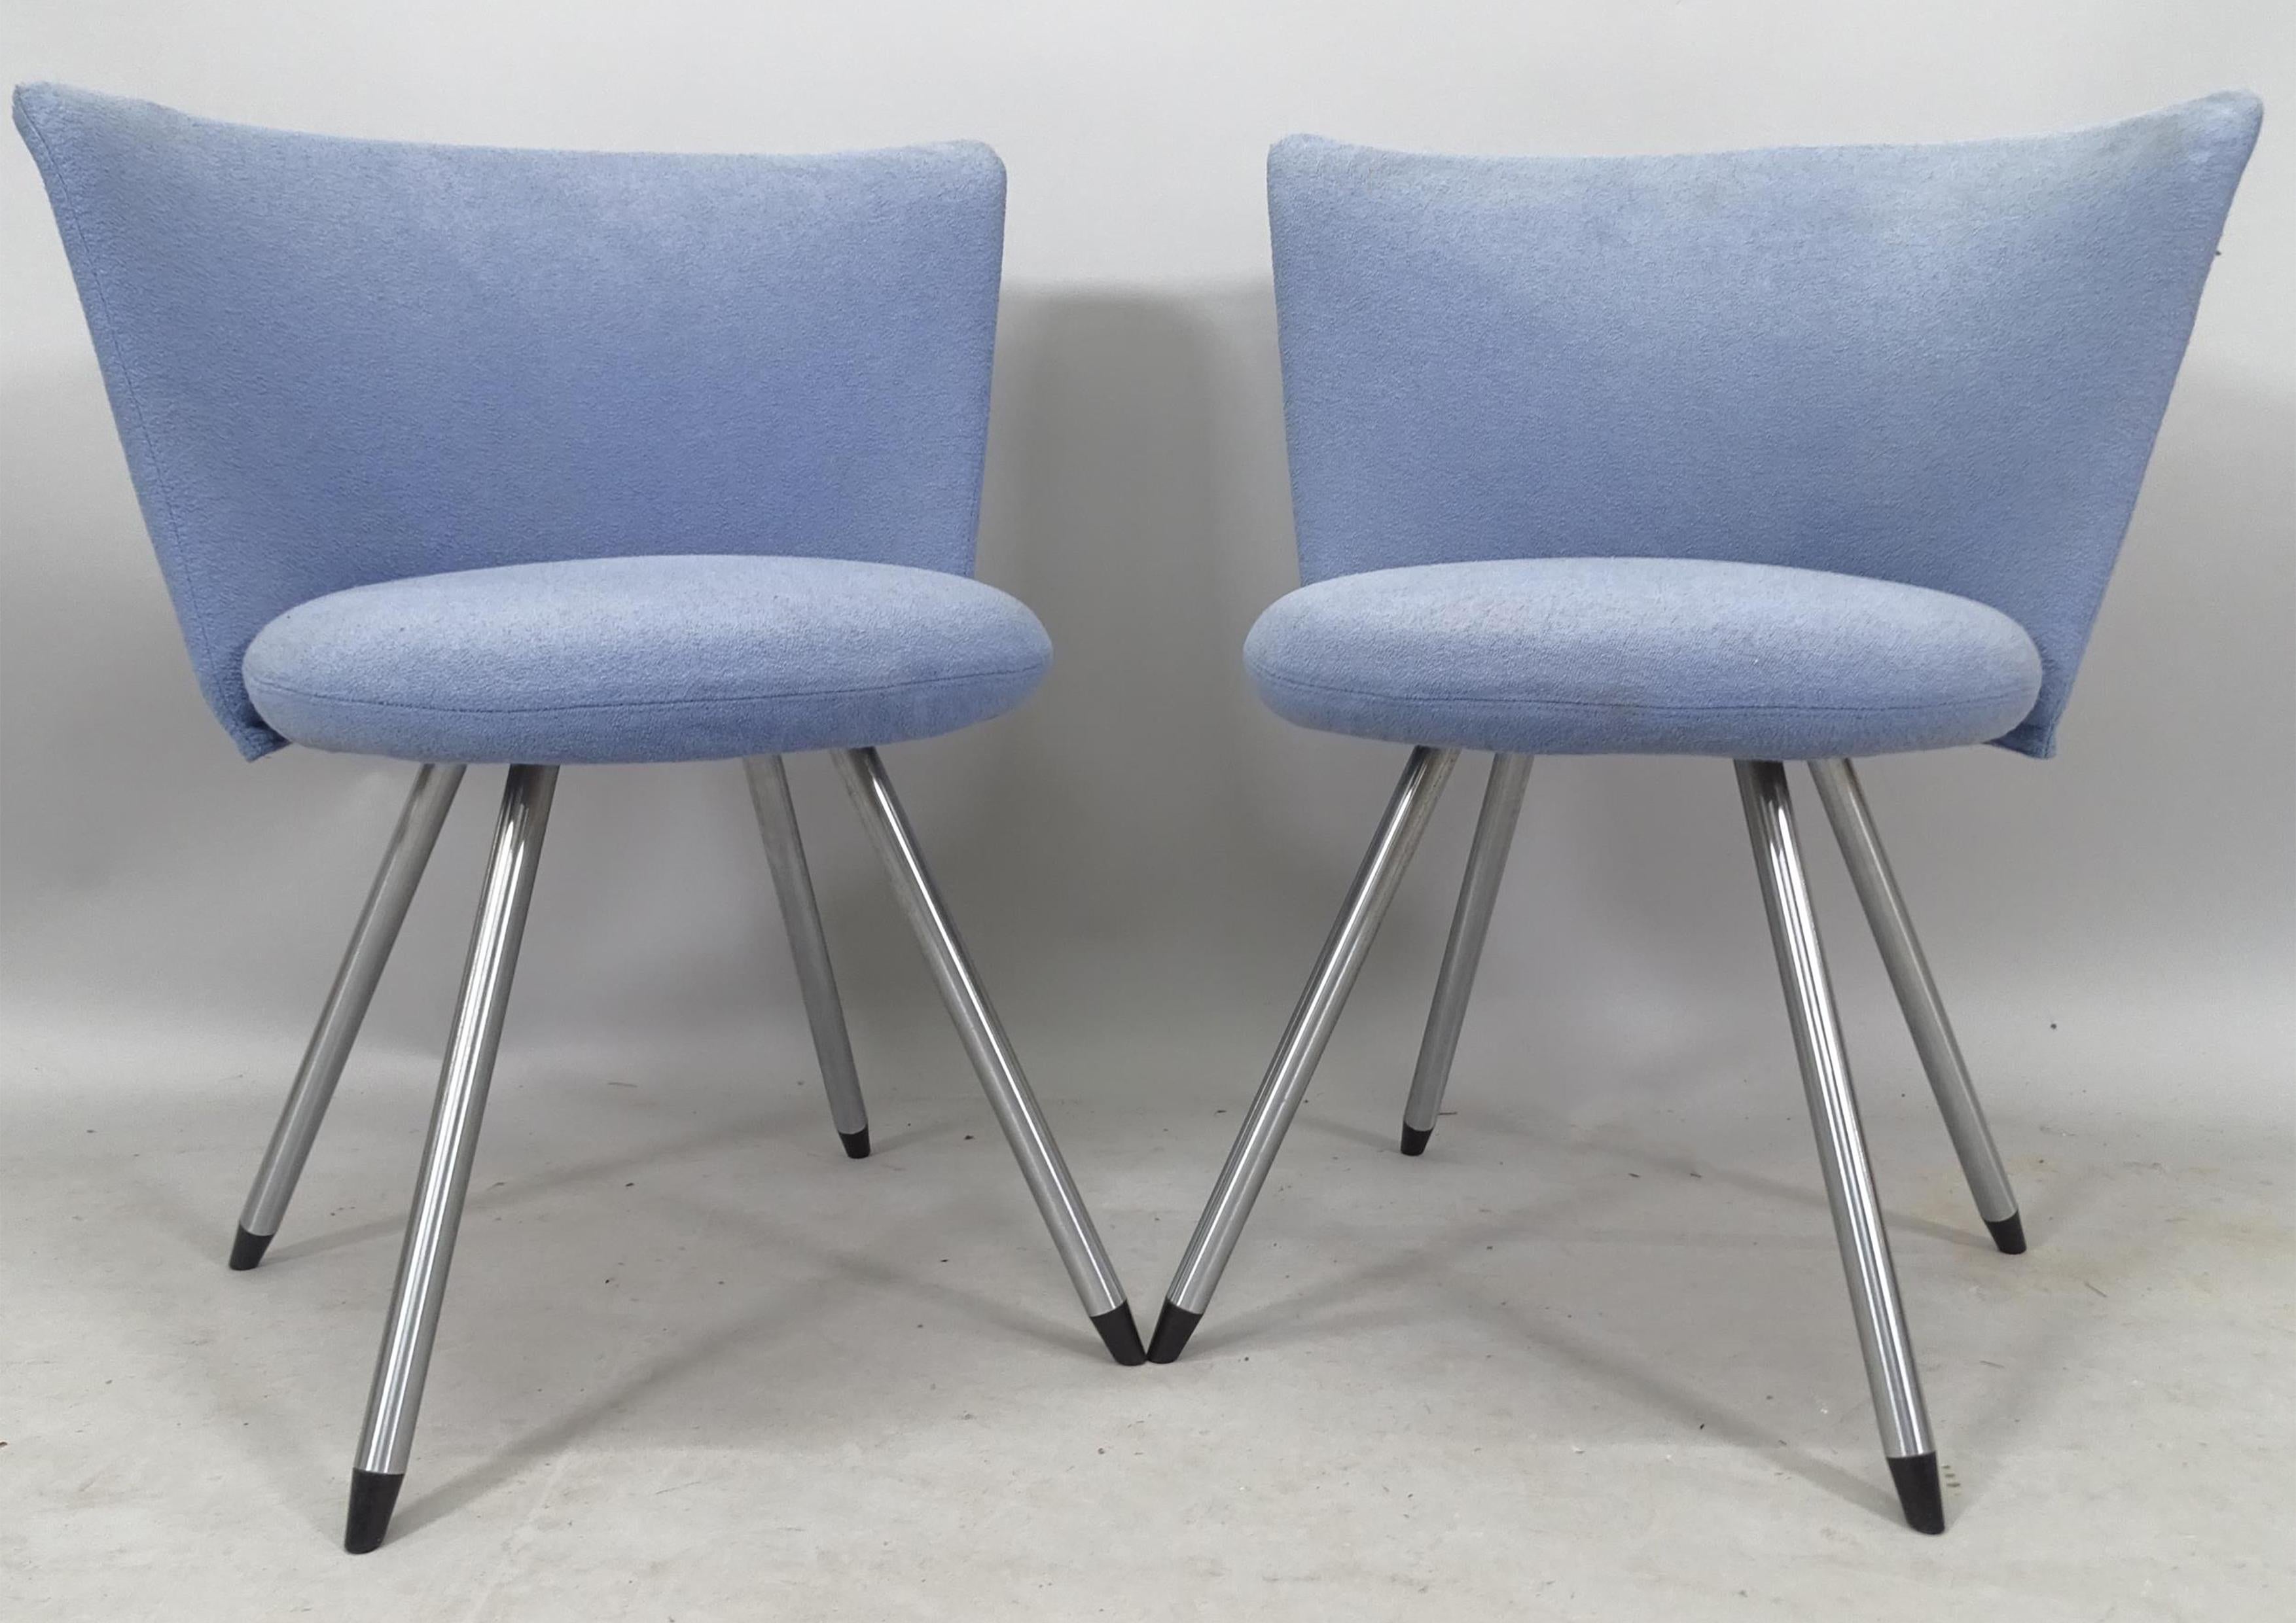 20th Century A Pair of Blue Cocktail Chairs Model Ej11 by Team Foersom & Hiort Lorenzen For Sale